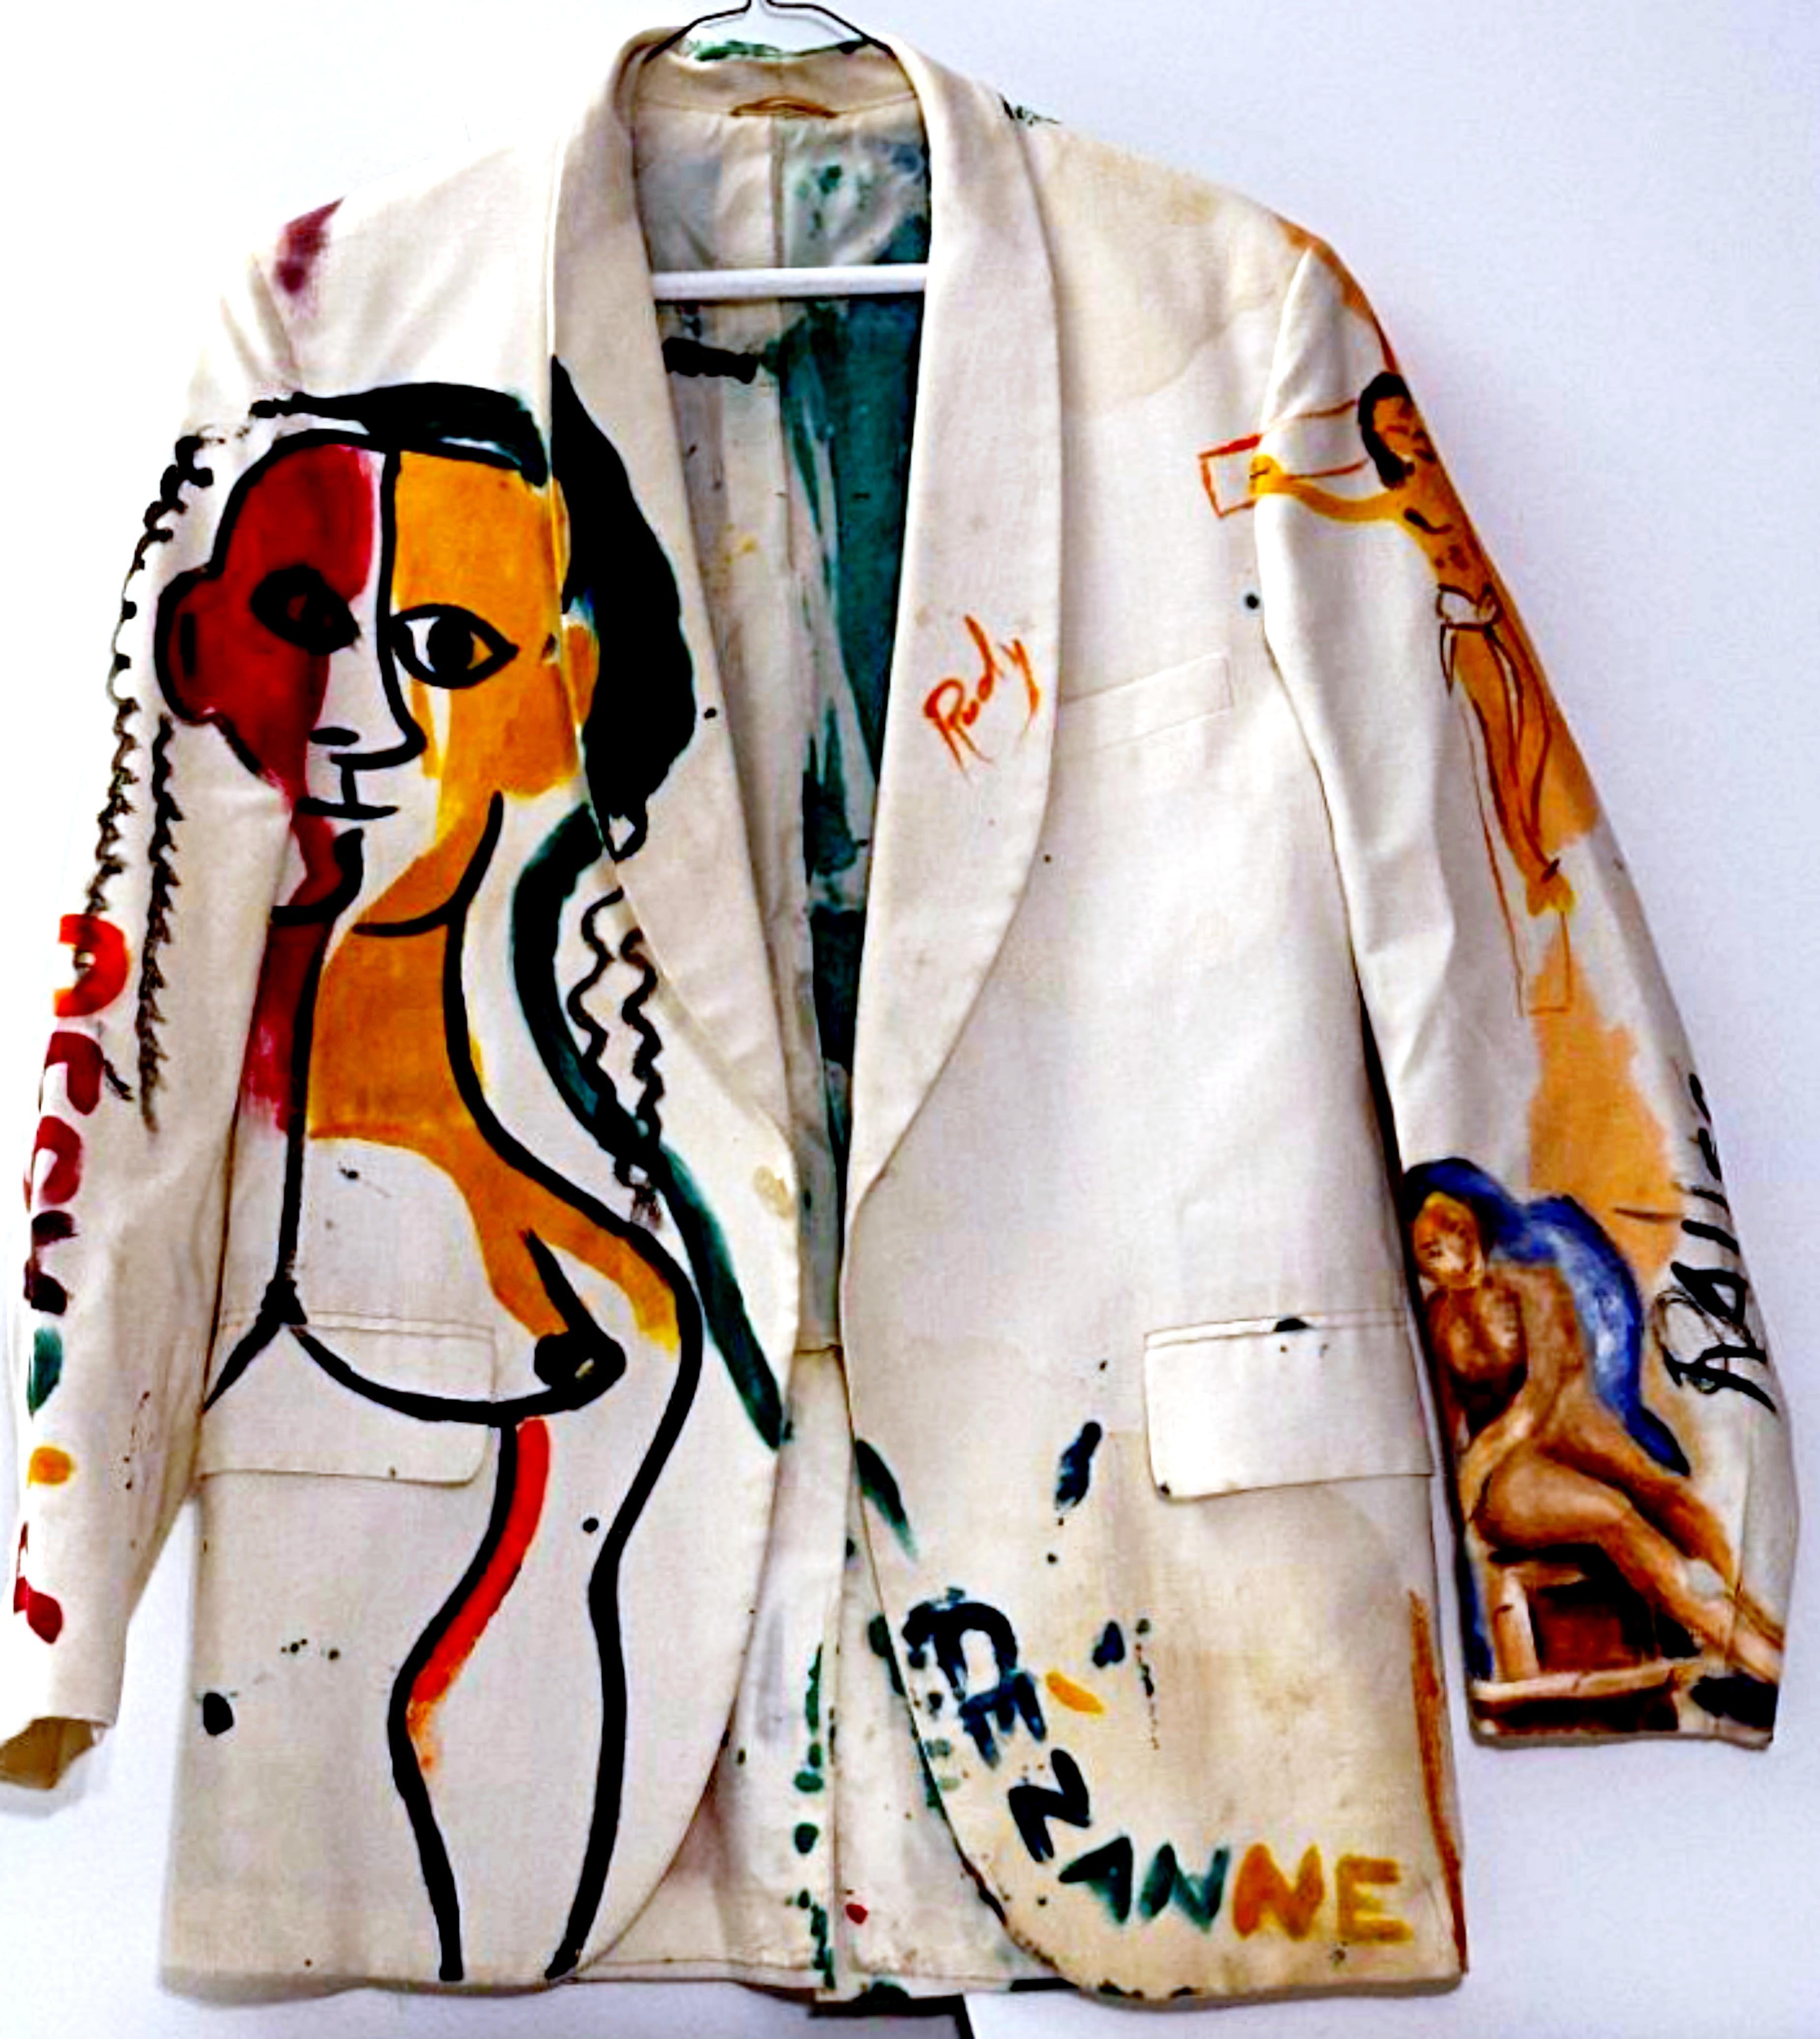 The Art Jacket with Picasso, Cezanne & Monet, hand signed by Robert Rauschenberg